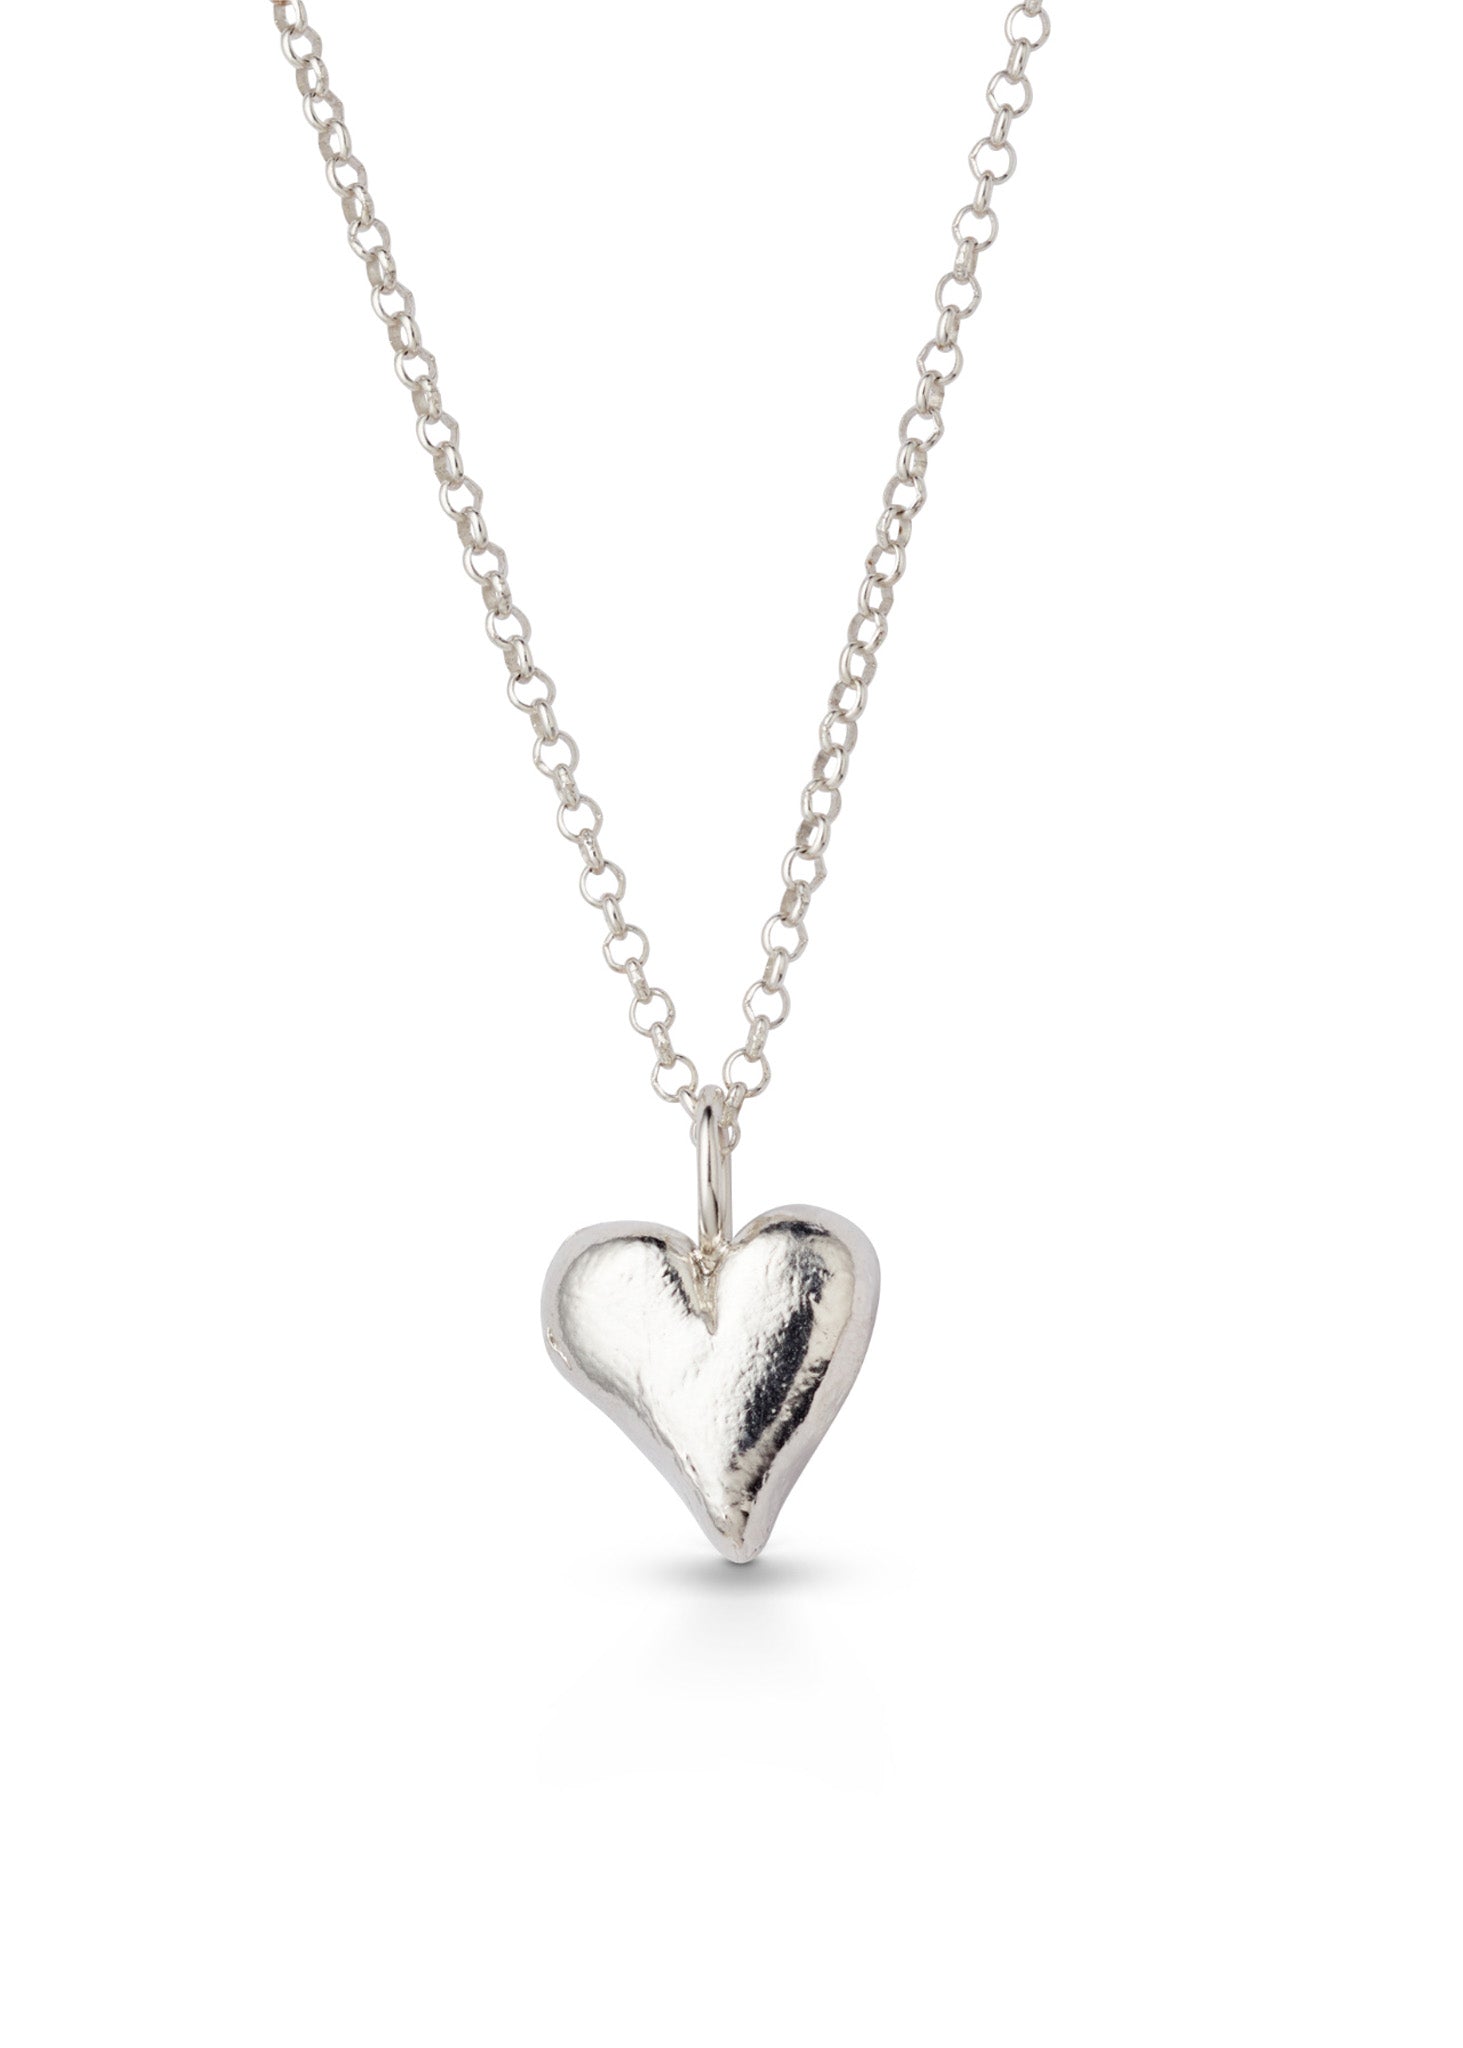 Mia heart pendant in silver with chain, large